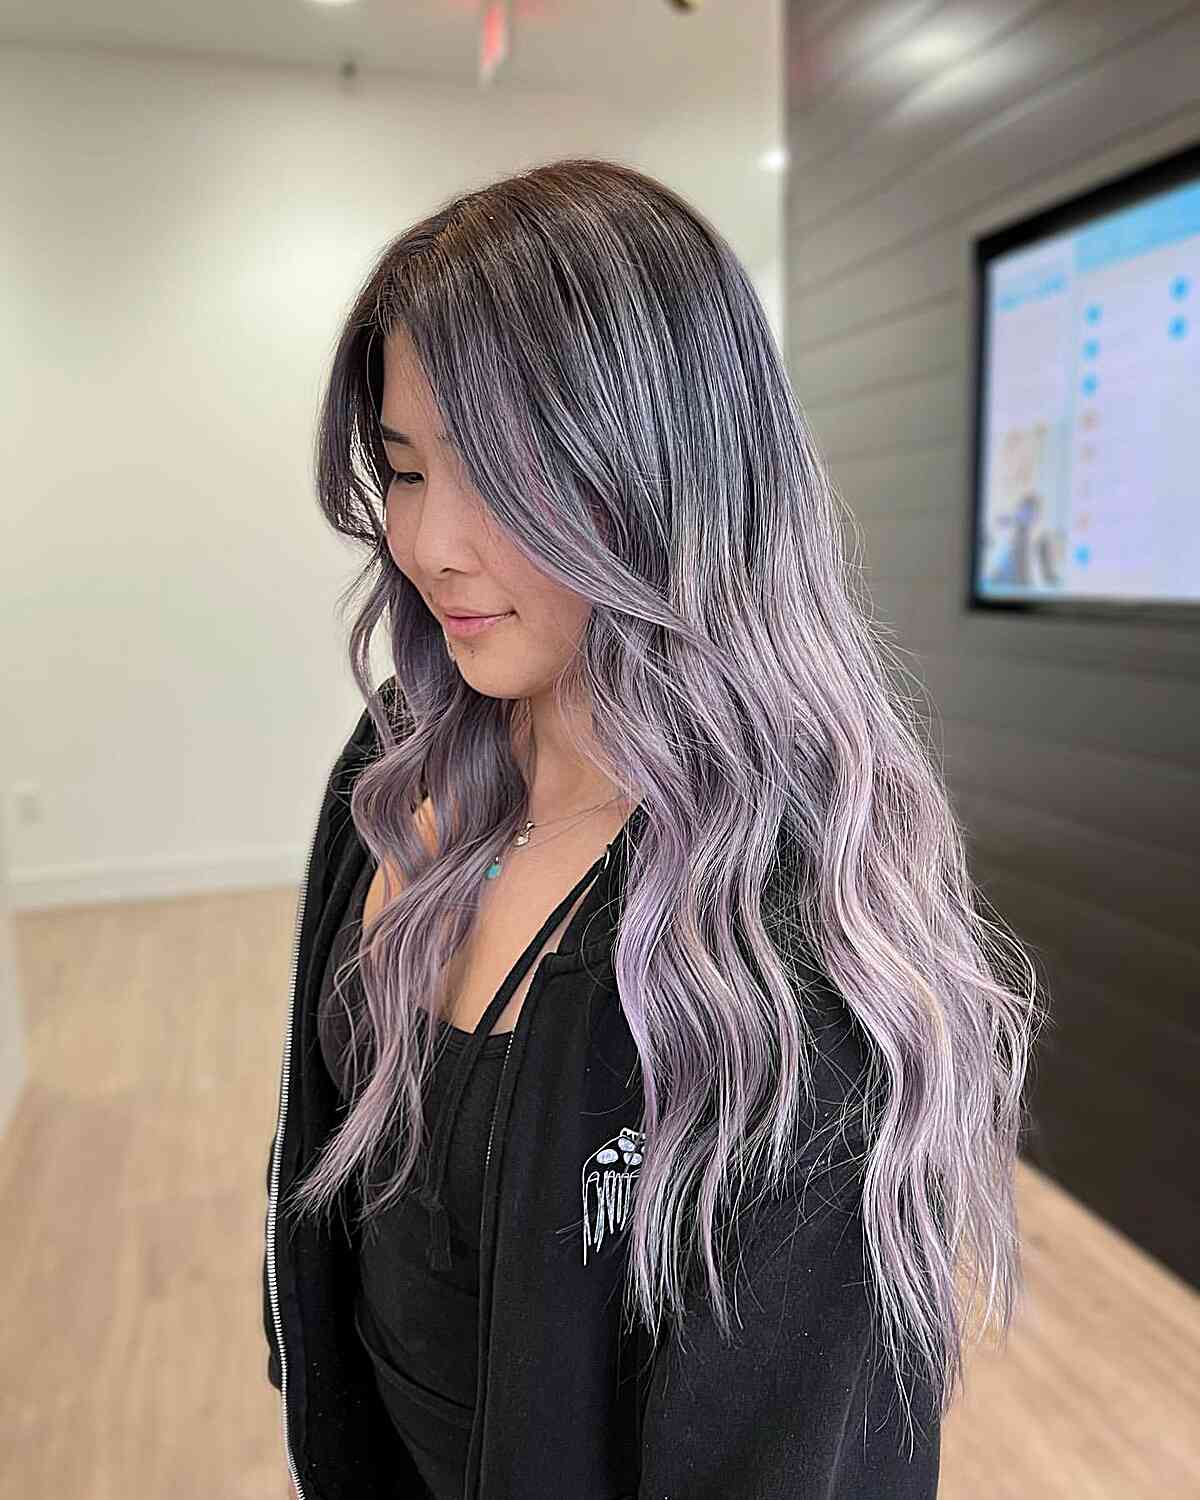 The Grey Ombre Hair Trend Of 2023: 15 Hottest Examples